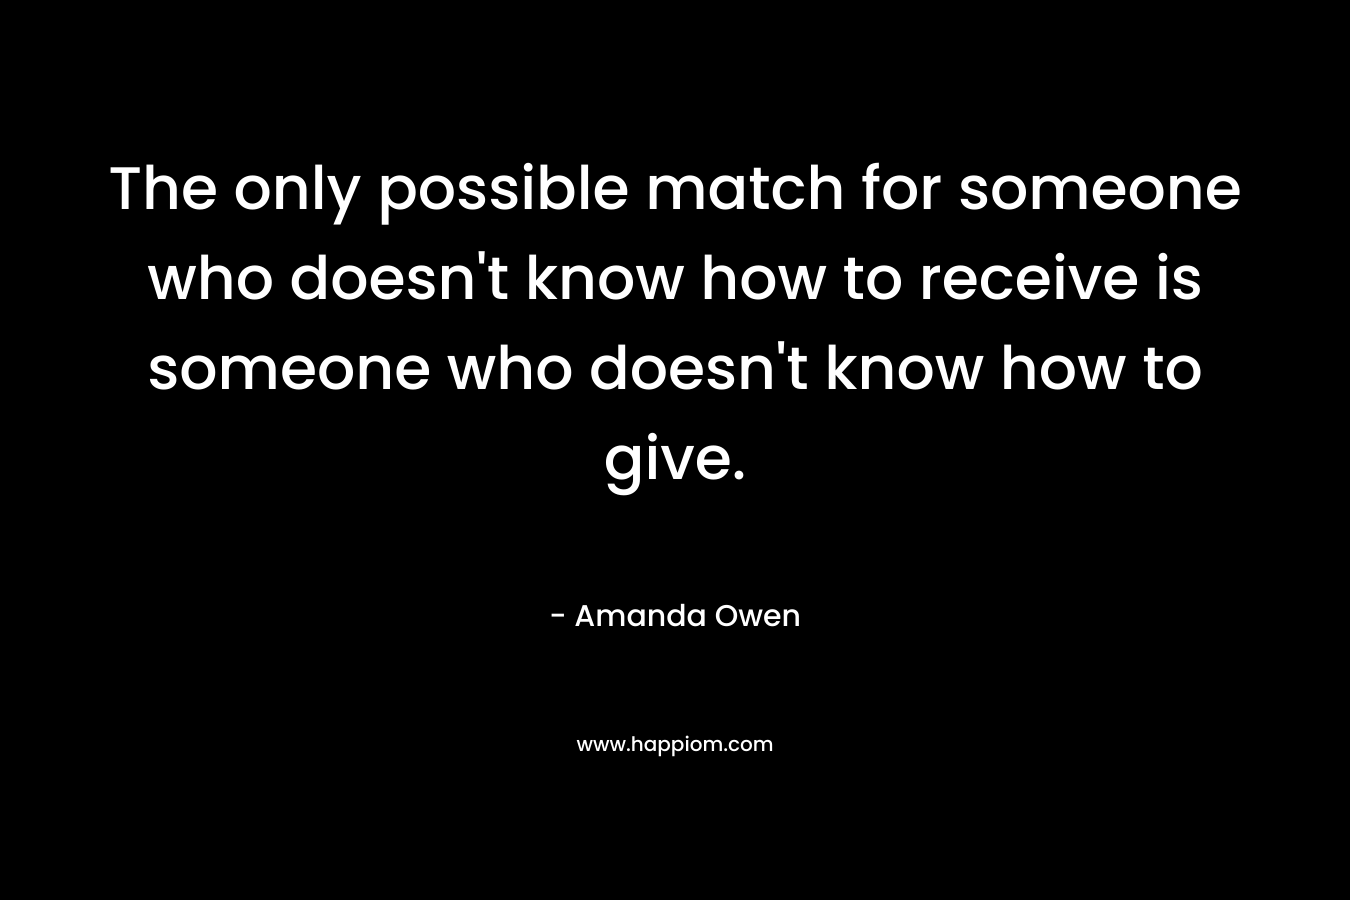 The only possible match for someone who doesn’t know how to receive is someone who doesn’t know how to give. – Amanda Owen